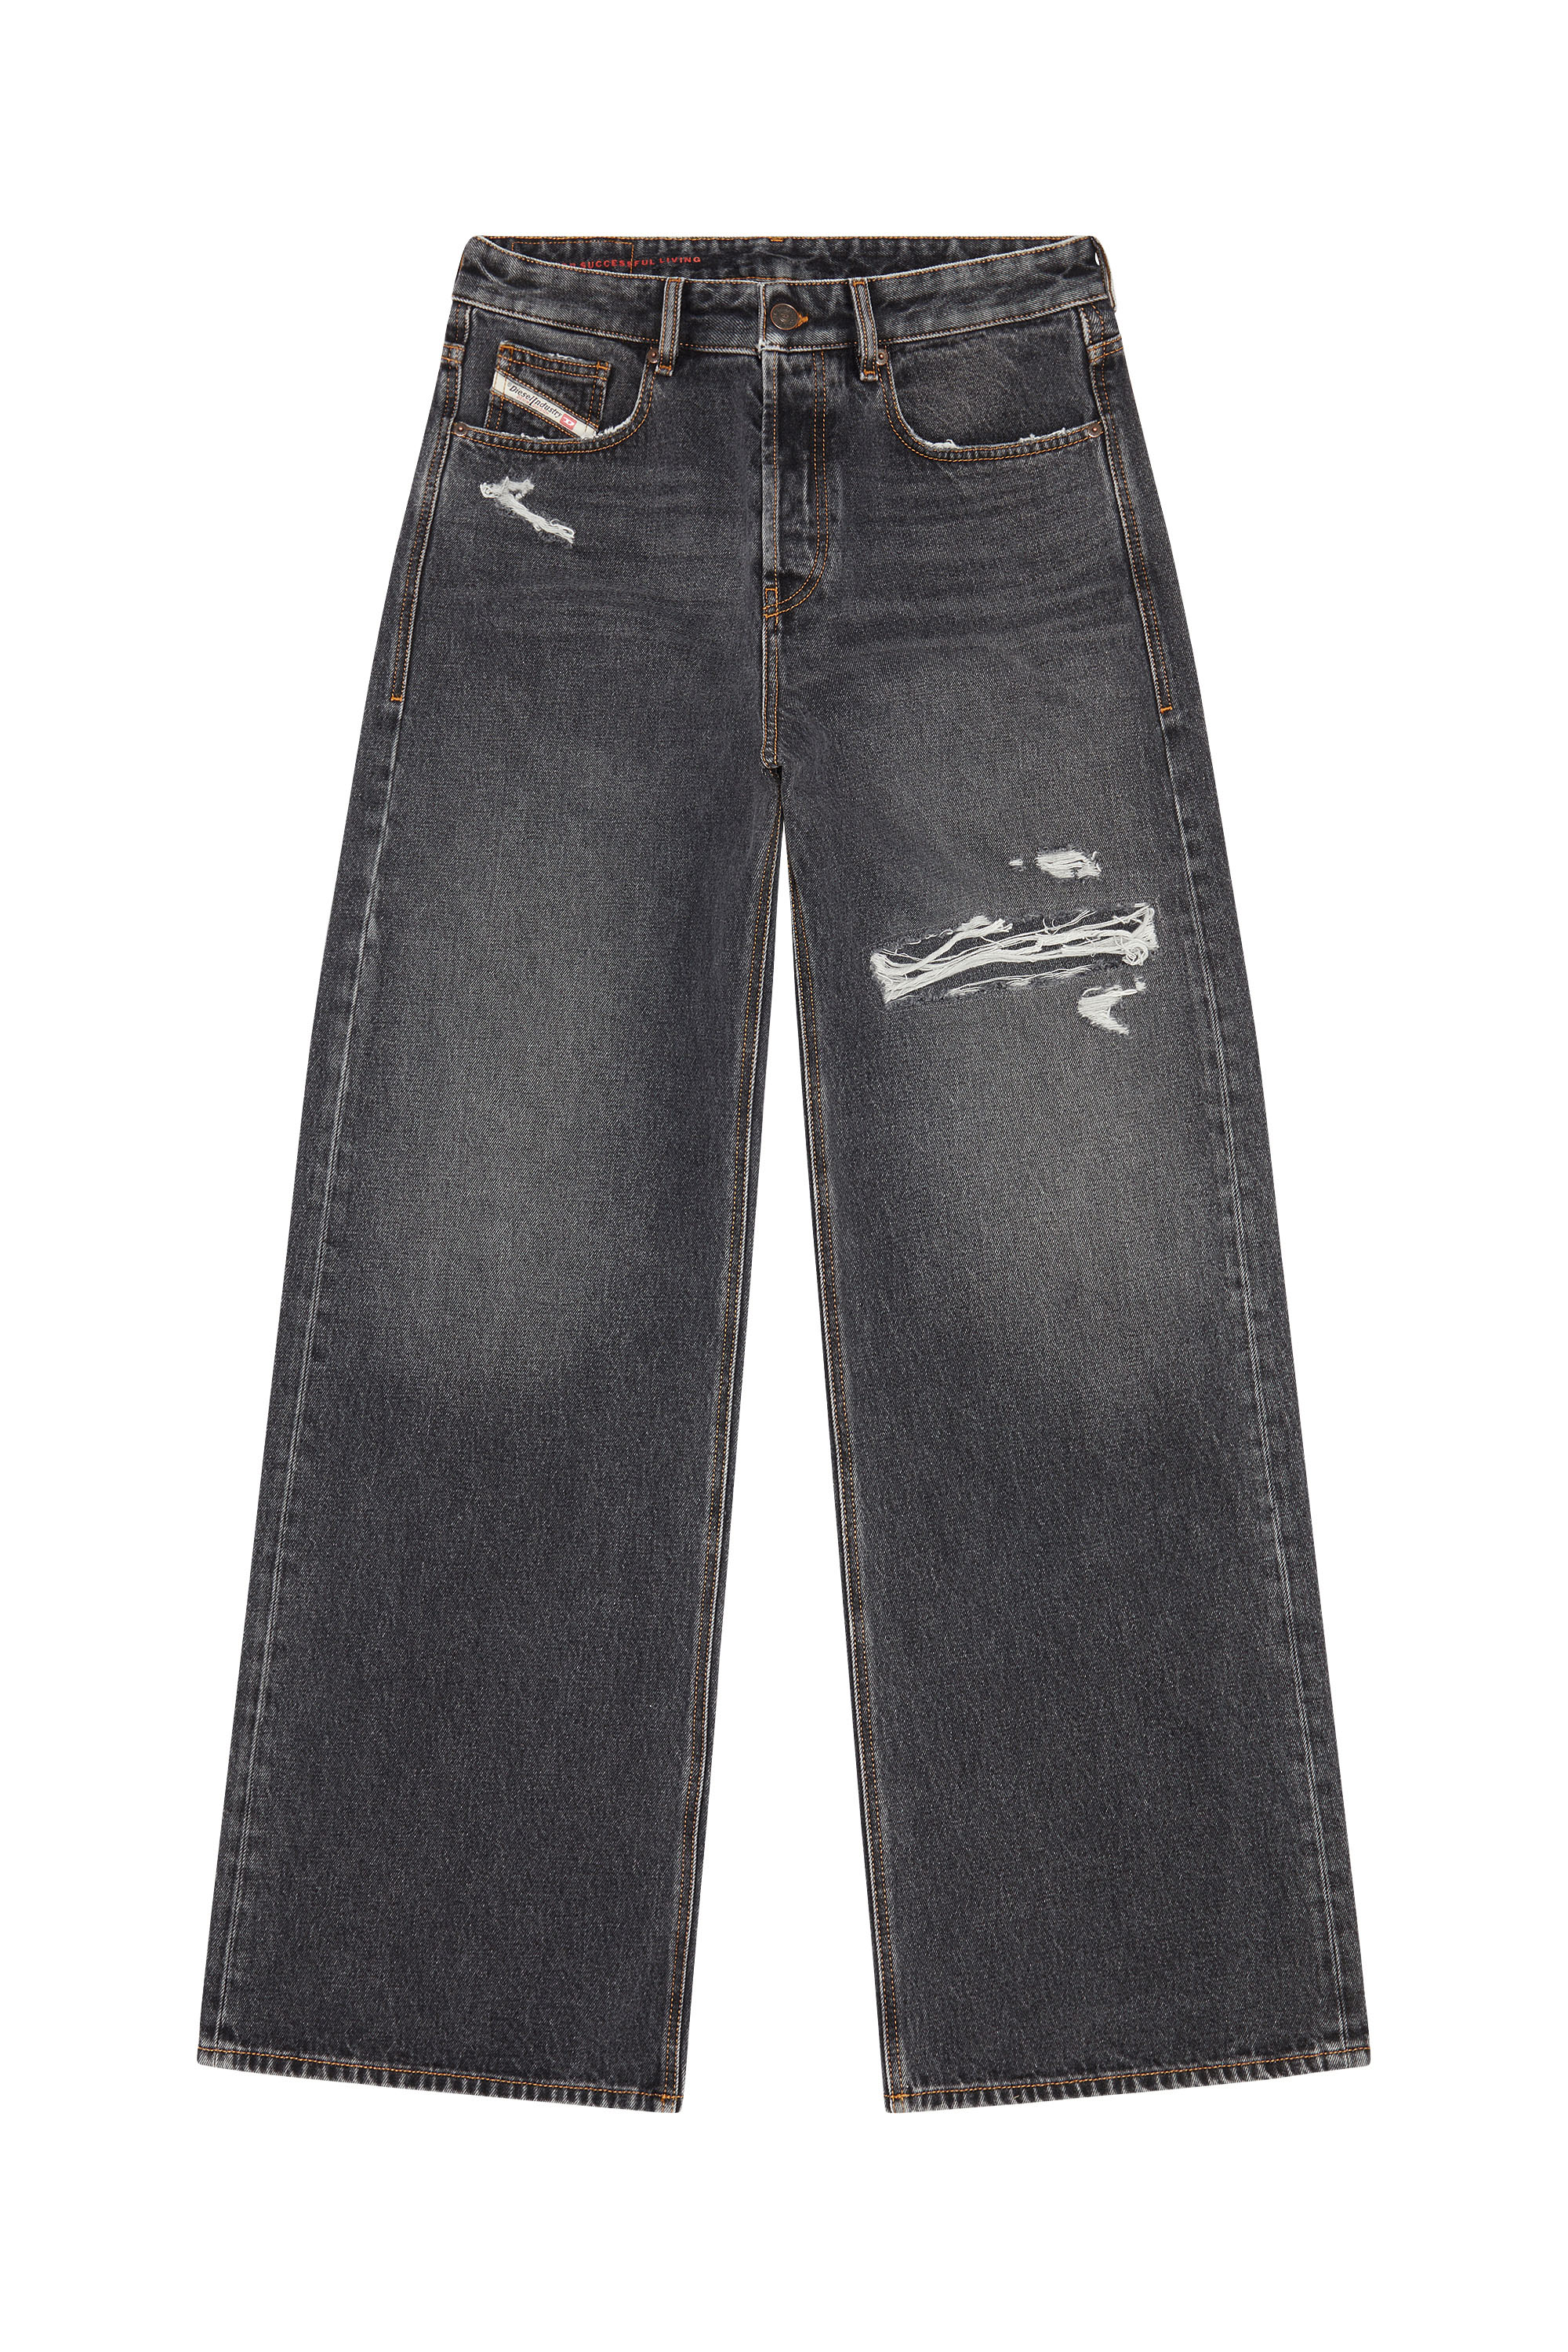 Diesel - Straight Jeans D-Rise 007F6, Hombre Straight Jeans - D-Rise in Negro - Image 3